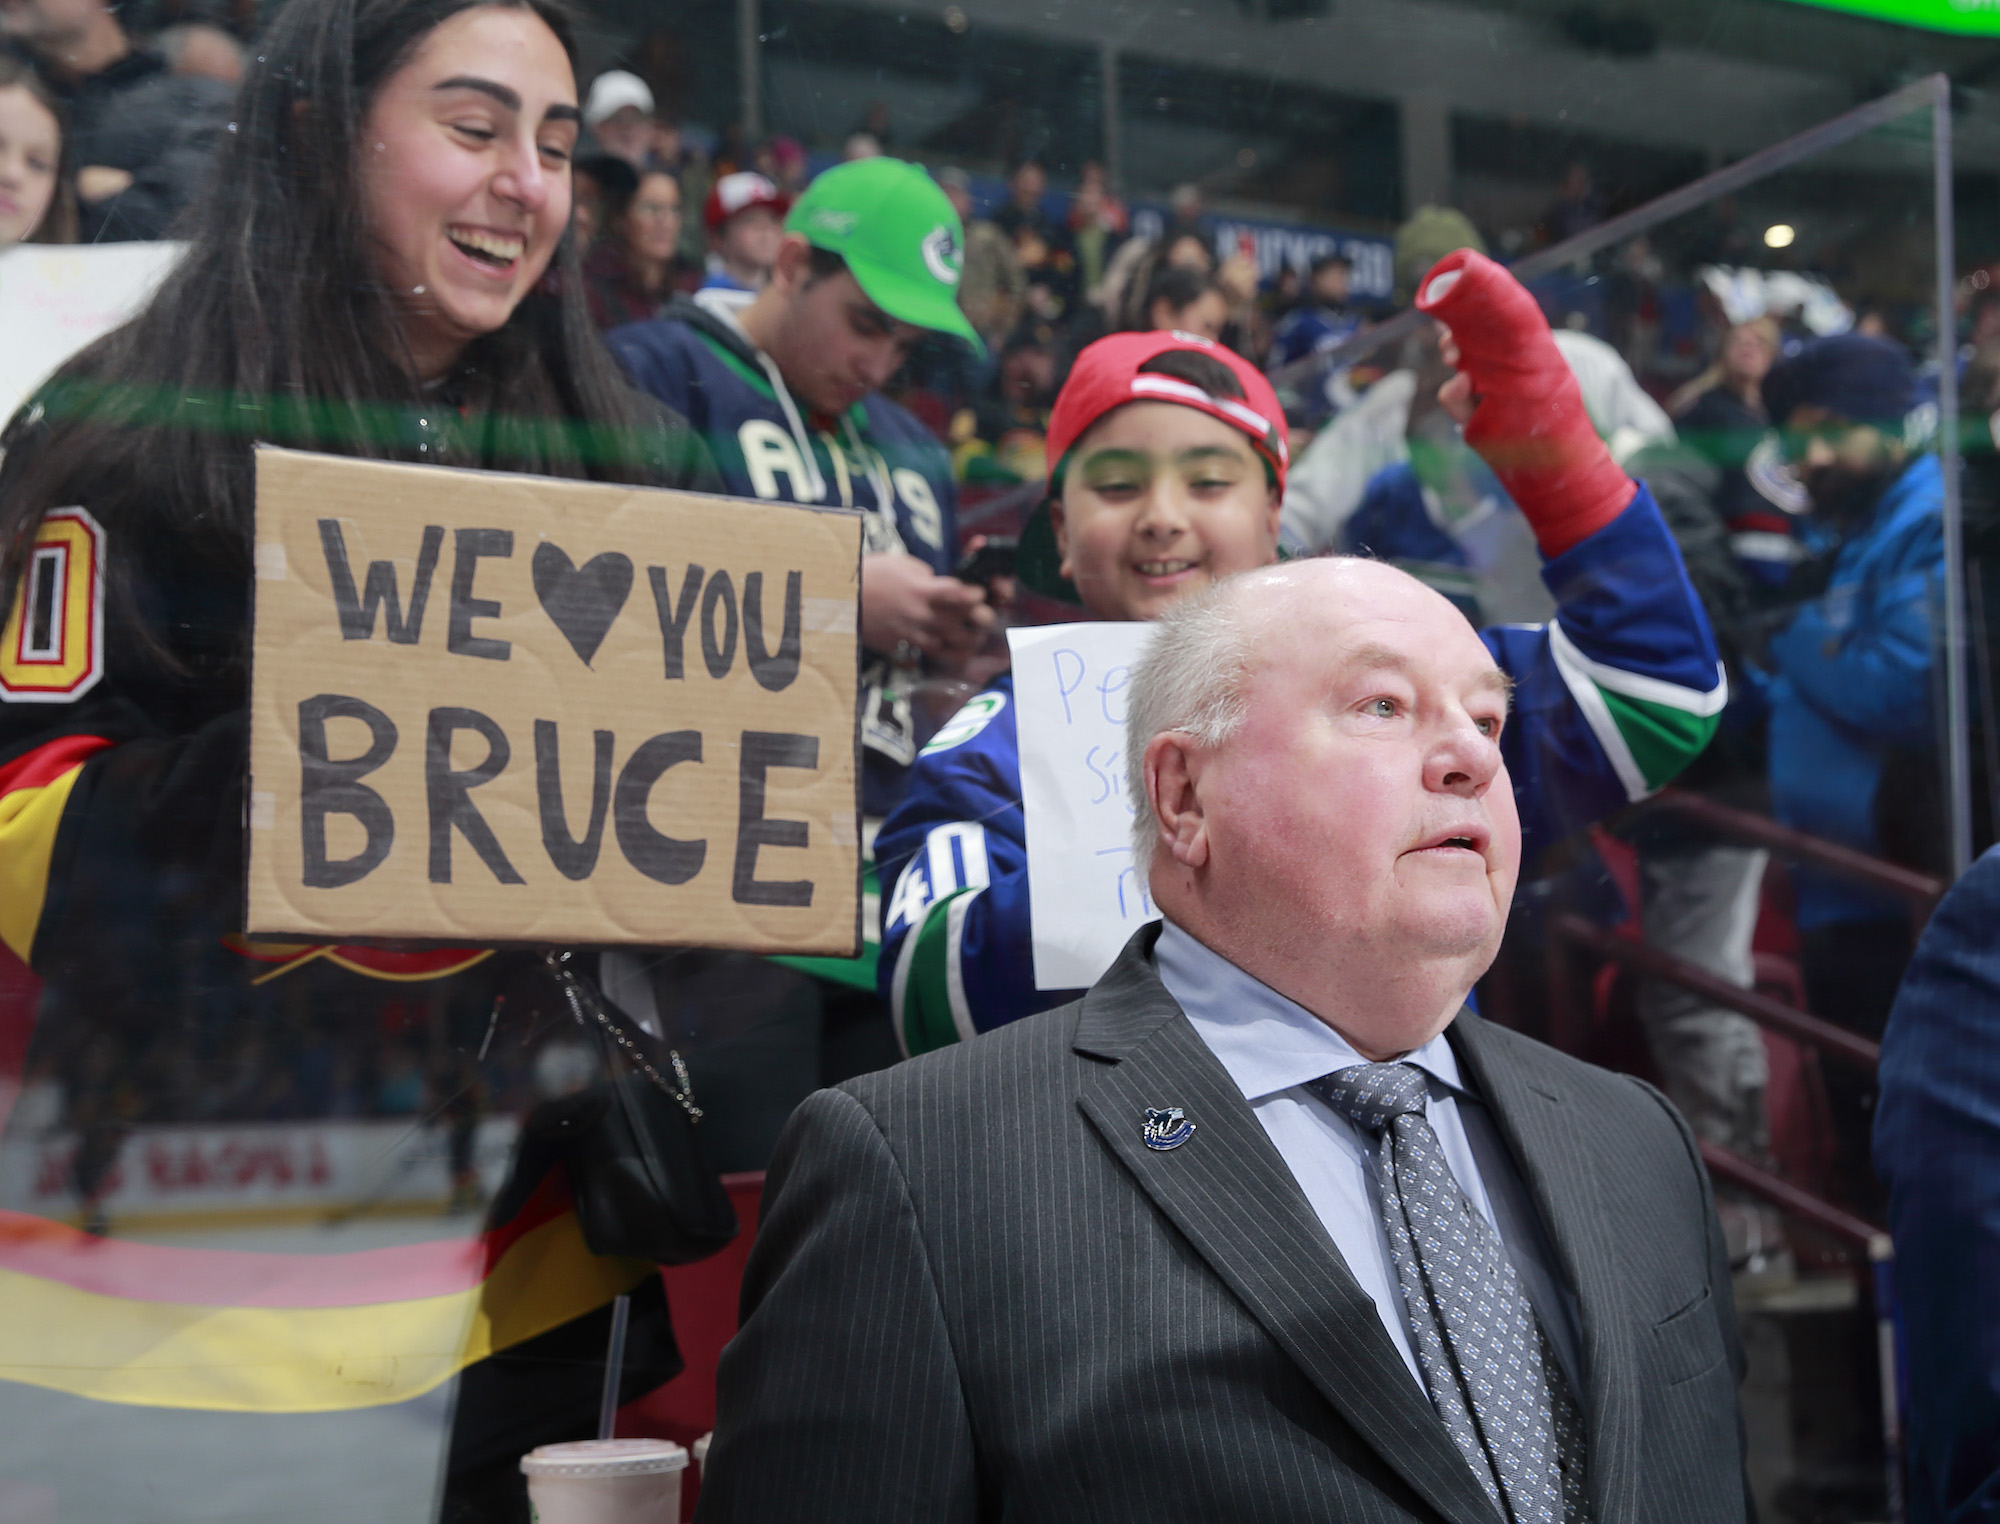 VANCOUVER, CANADA - JANUARY 21: Head coach Bruce Boudreau of the Vancouver Canucks looks on from the bench during their NHL game against the Edmonton Oilers at Rogers Arena January 21, 2023 in Vancouver, British Columbia, Canada. (Photo by Jeff Vinnick/NHLI via Getty Images)